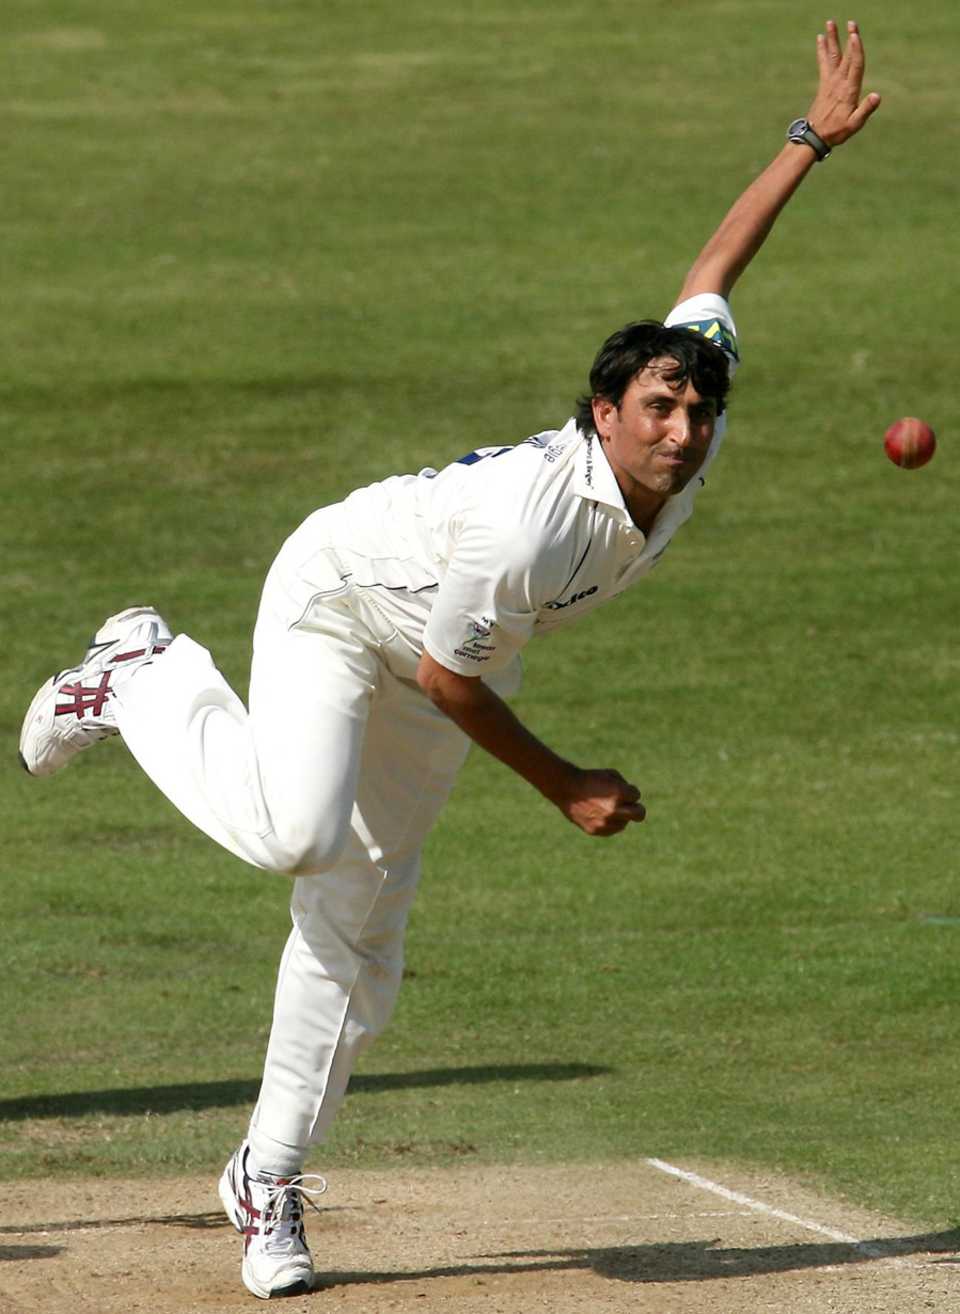 Younis Khan bowls, Yorkshire v Lancashire, County Championship Division One, 2nd day, August 10, 2007